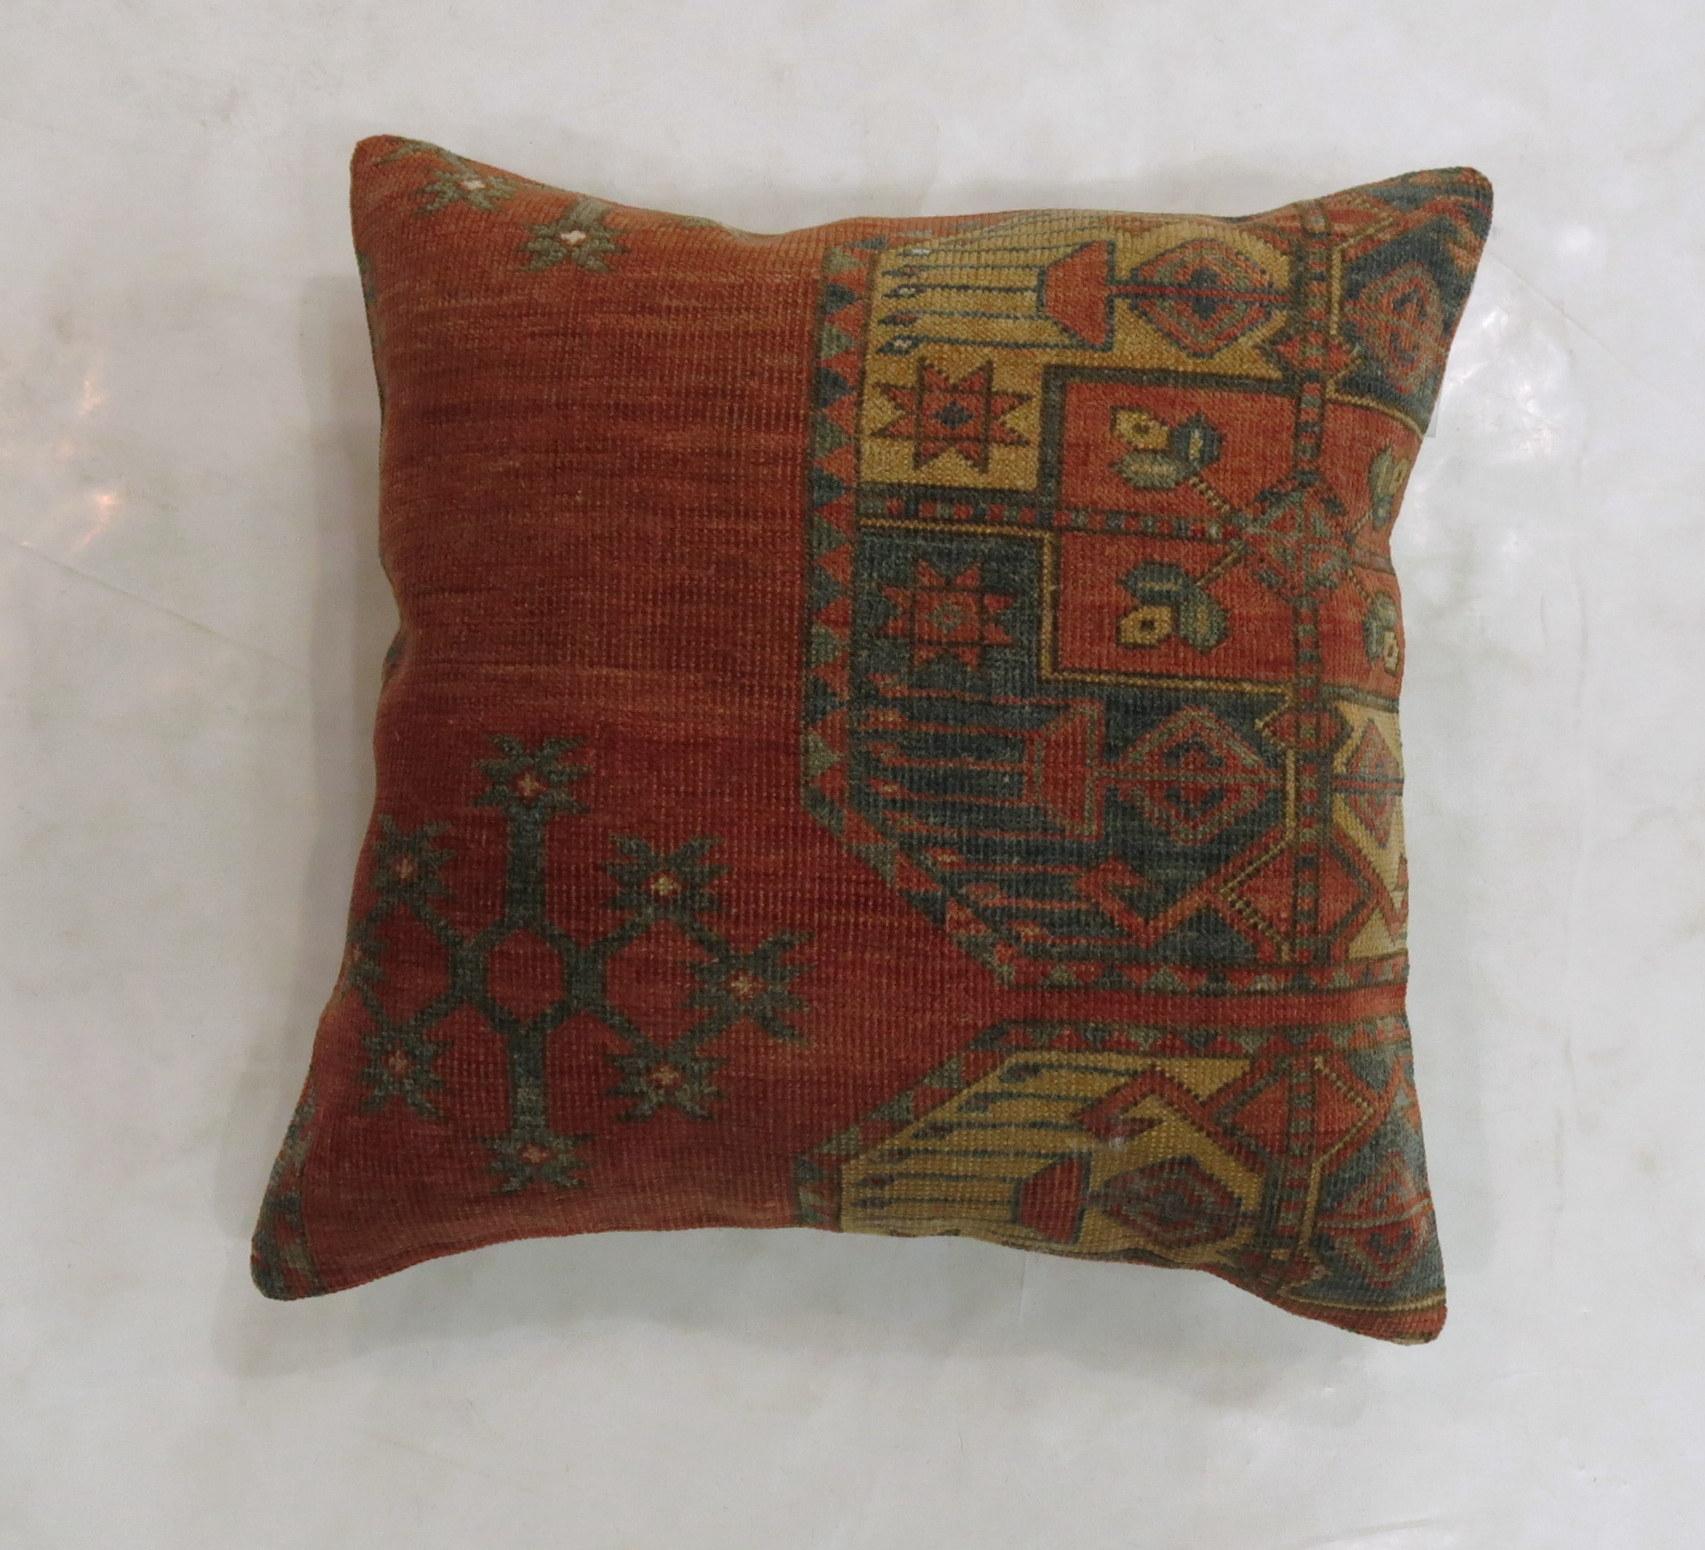 Pillow made from a 19th-century antique Ersari rug with cotton back and zipper closure.

Measures: 20'' x 20''.